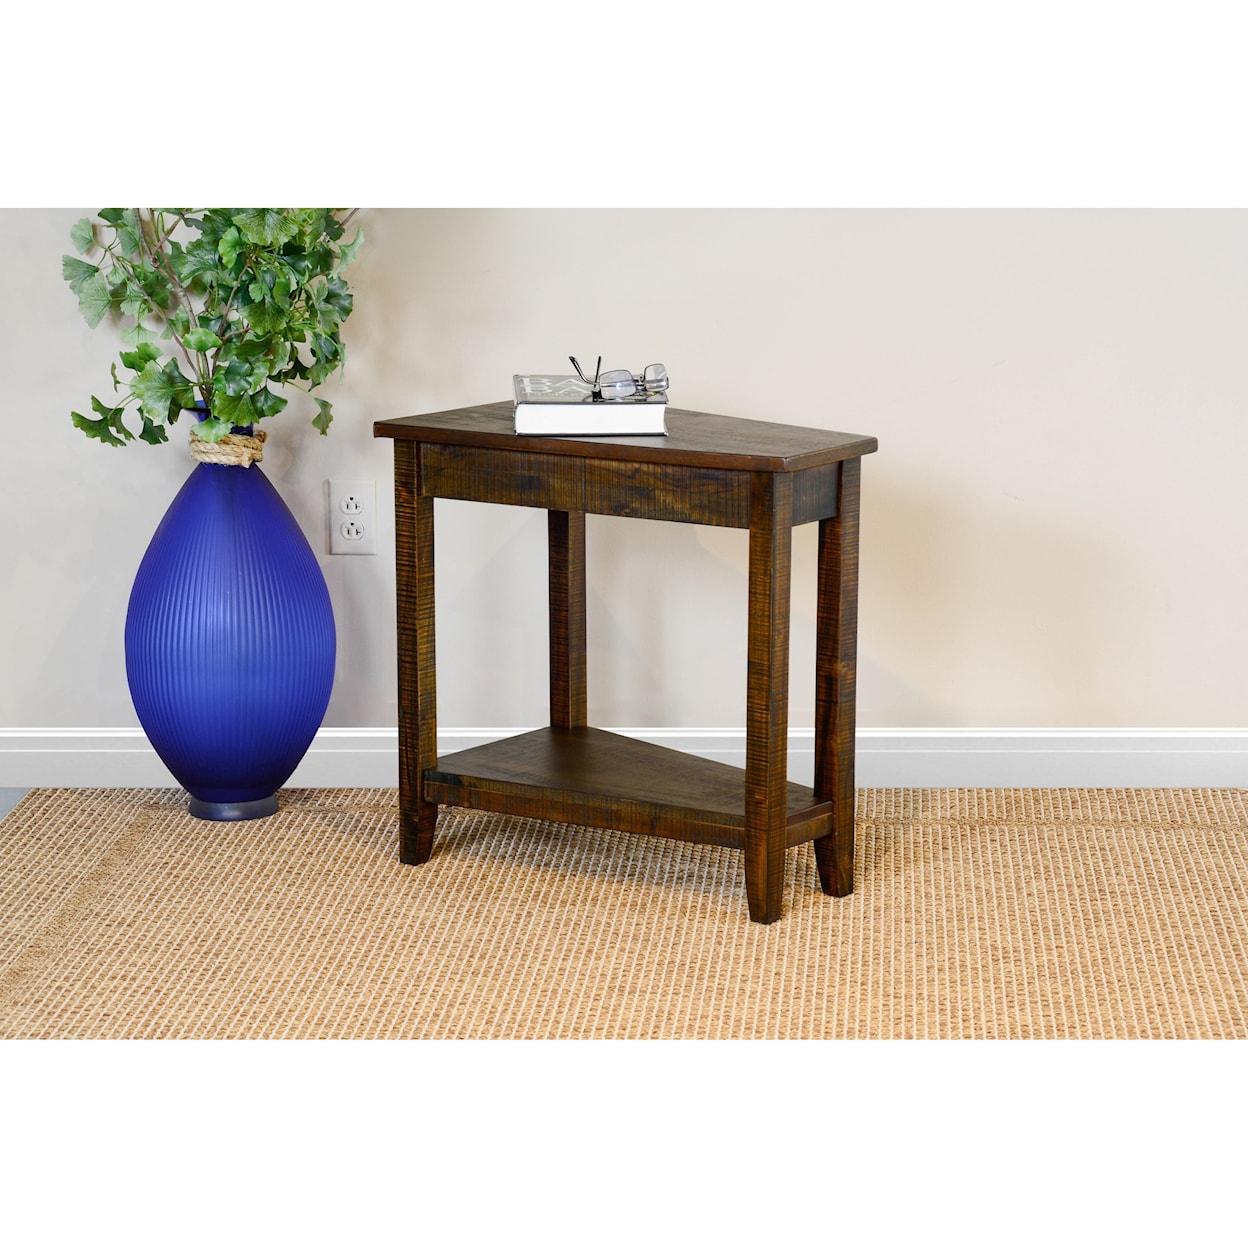 Sunny Designs 2226 Chair Side Table